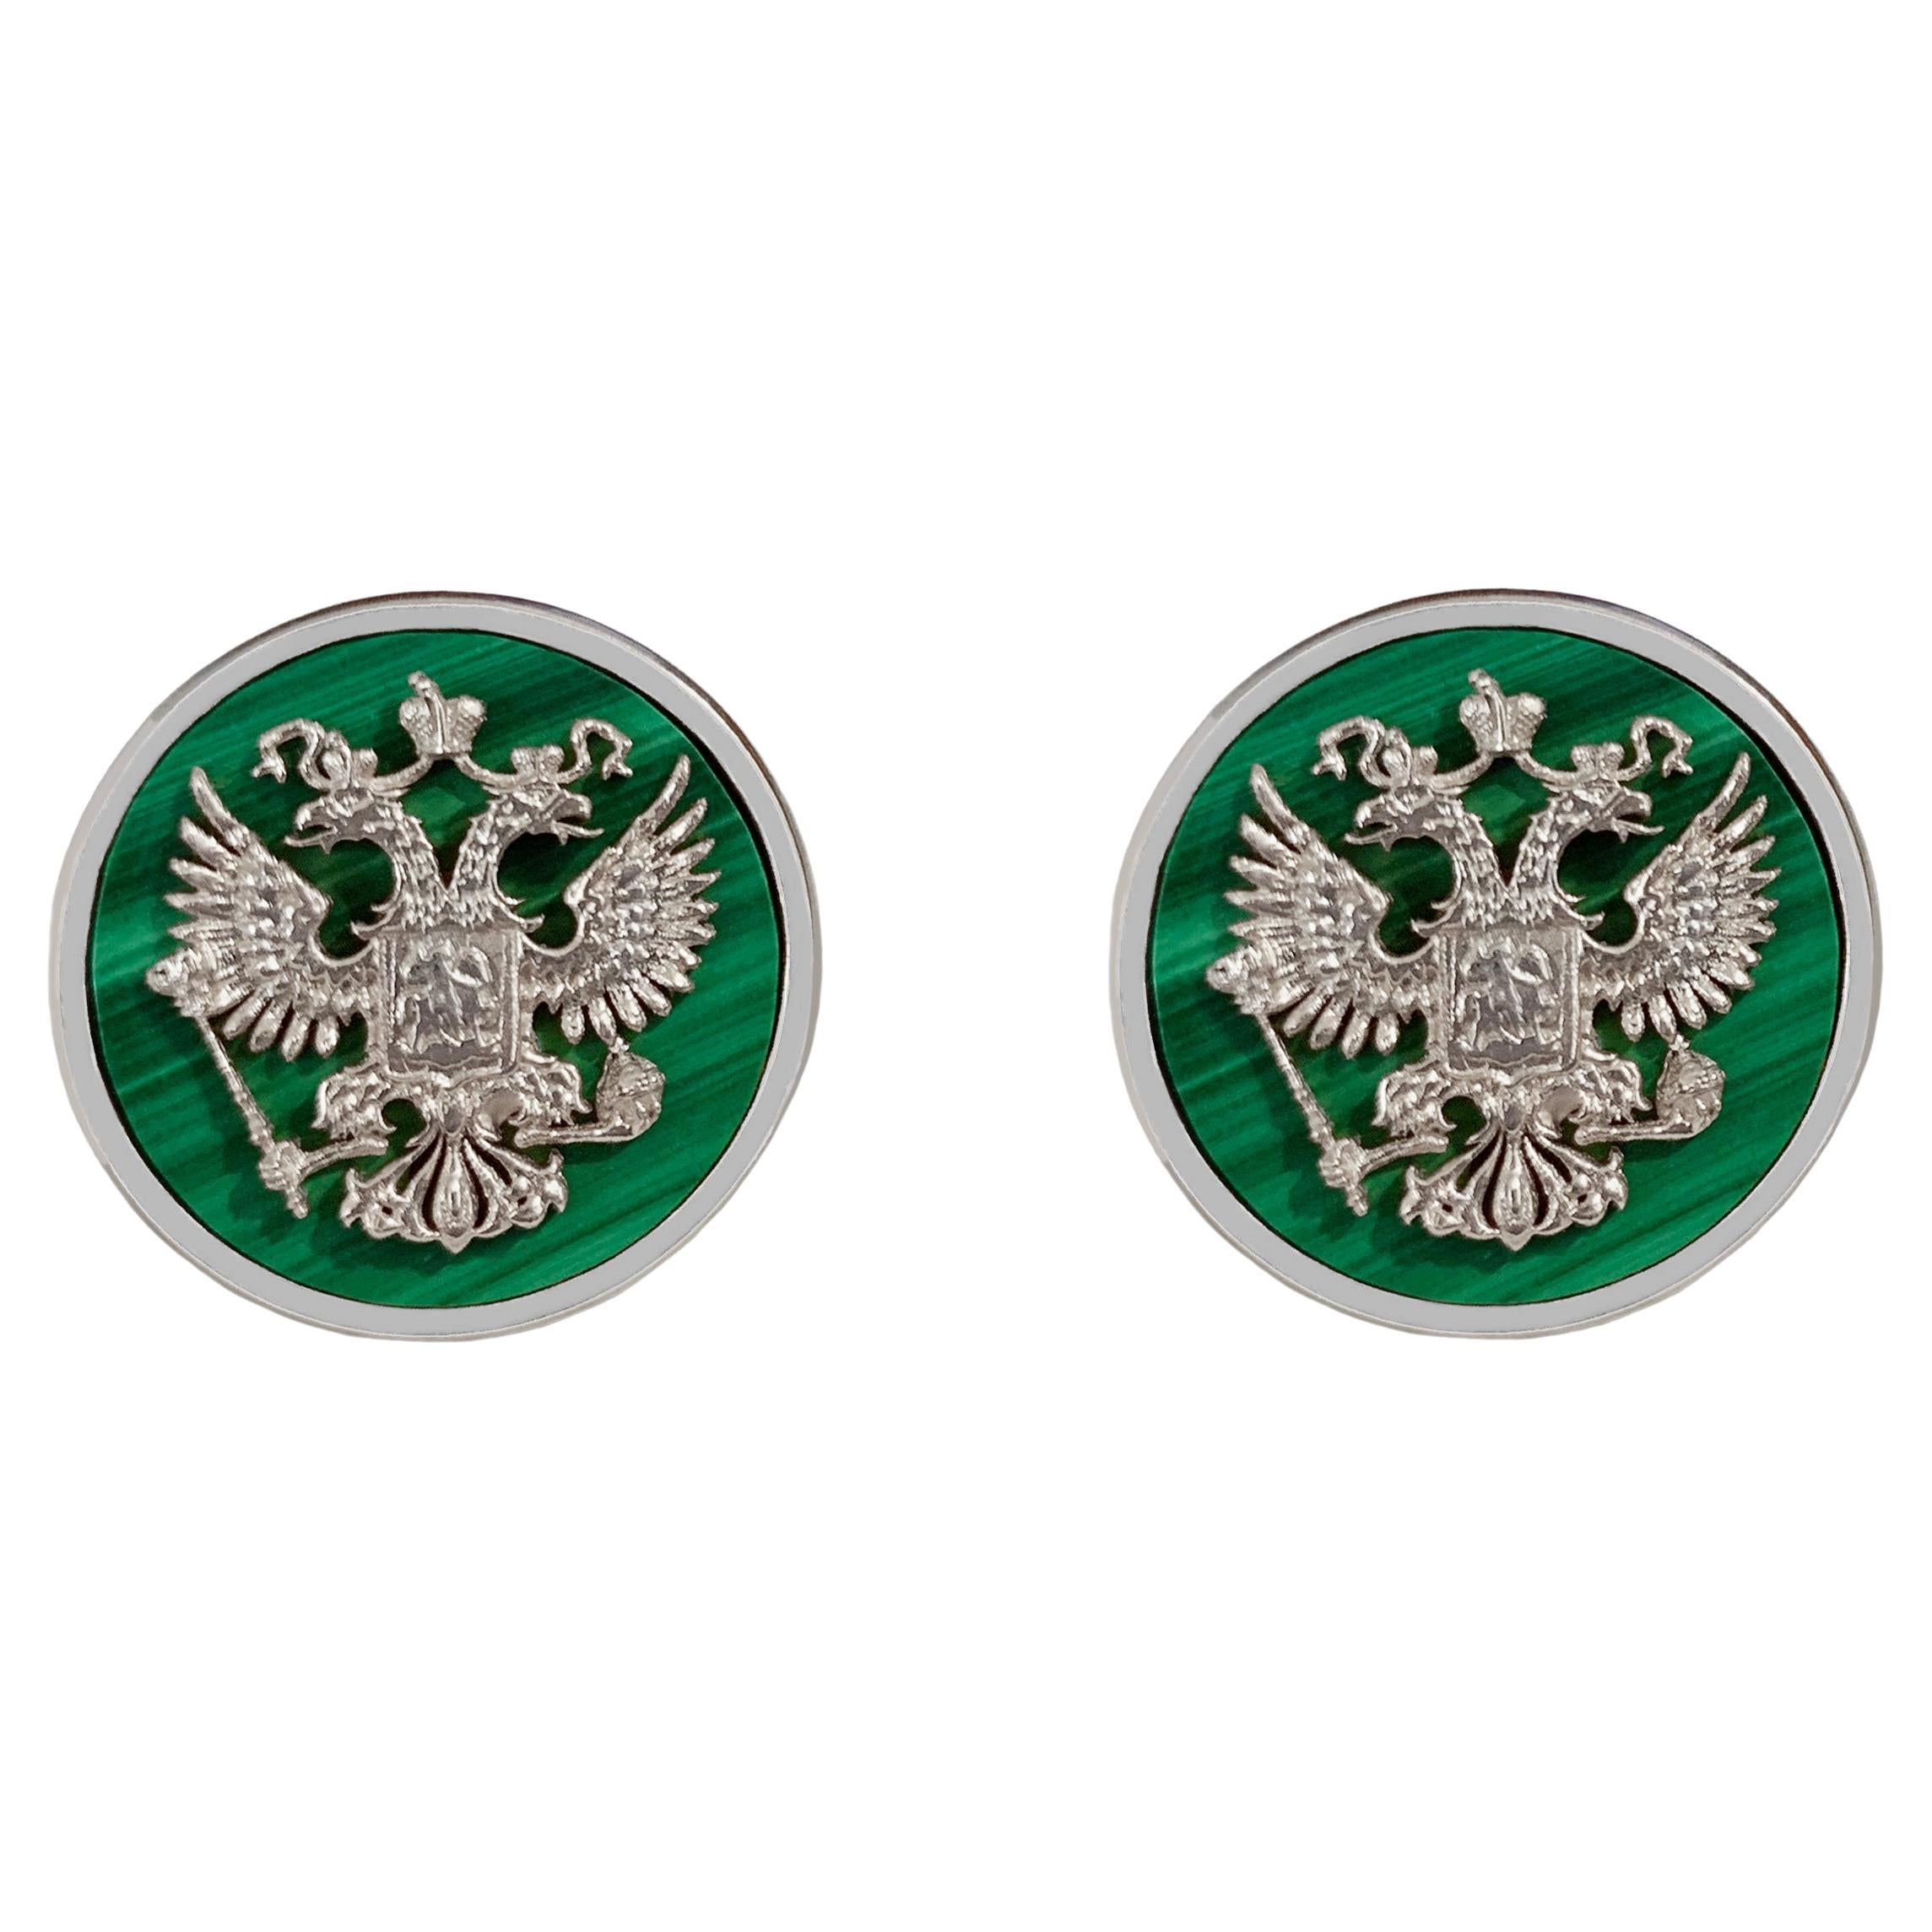 Double Eagle Cufflinks in 14k White Gold with Malachite